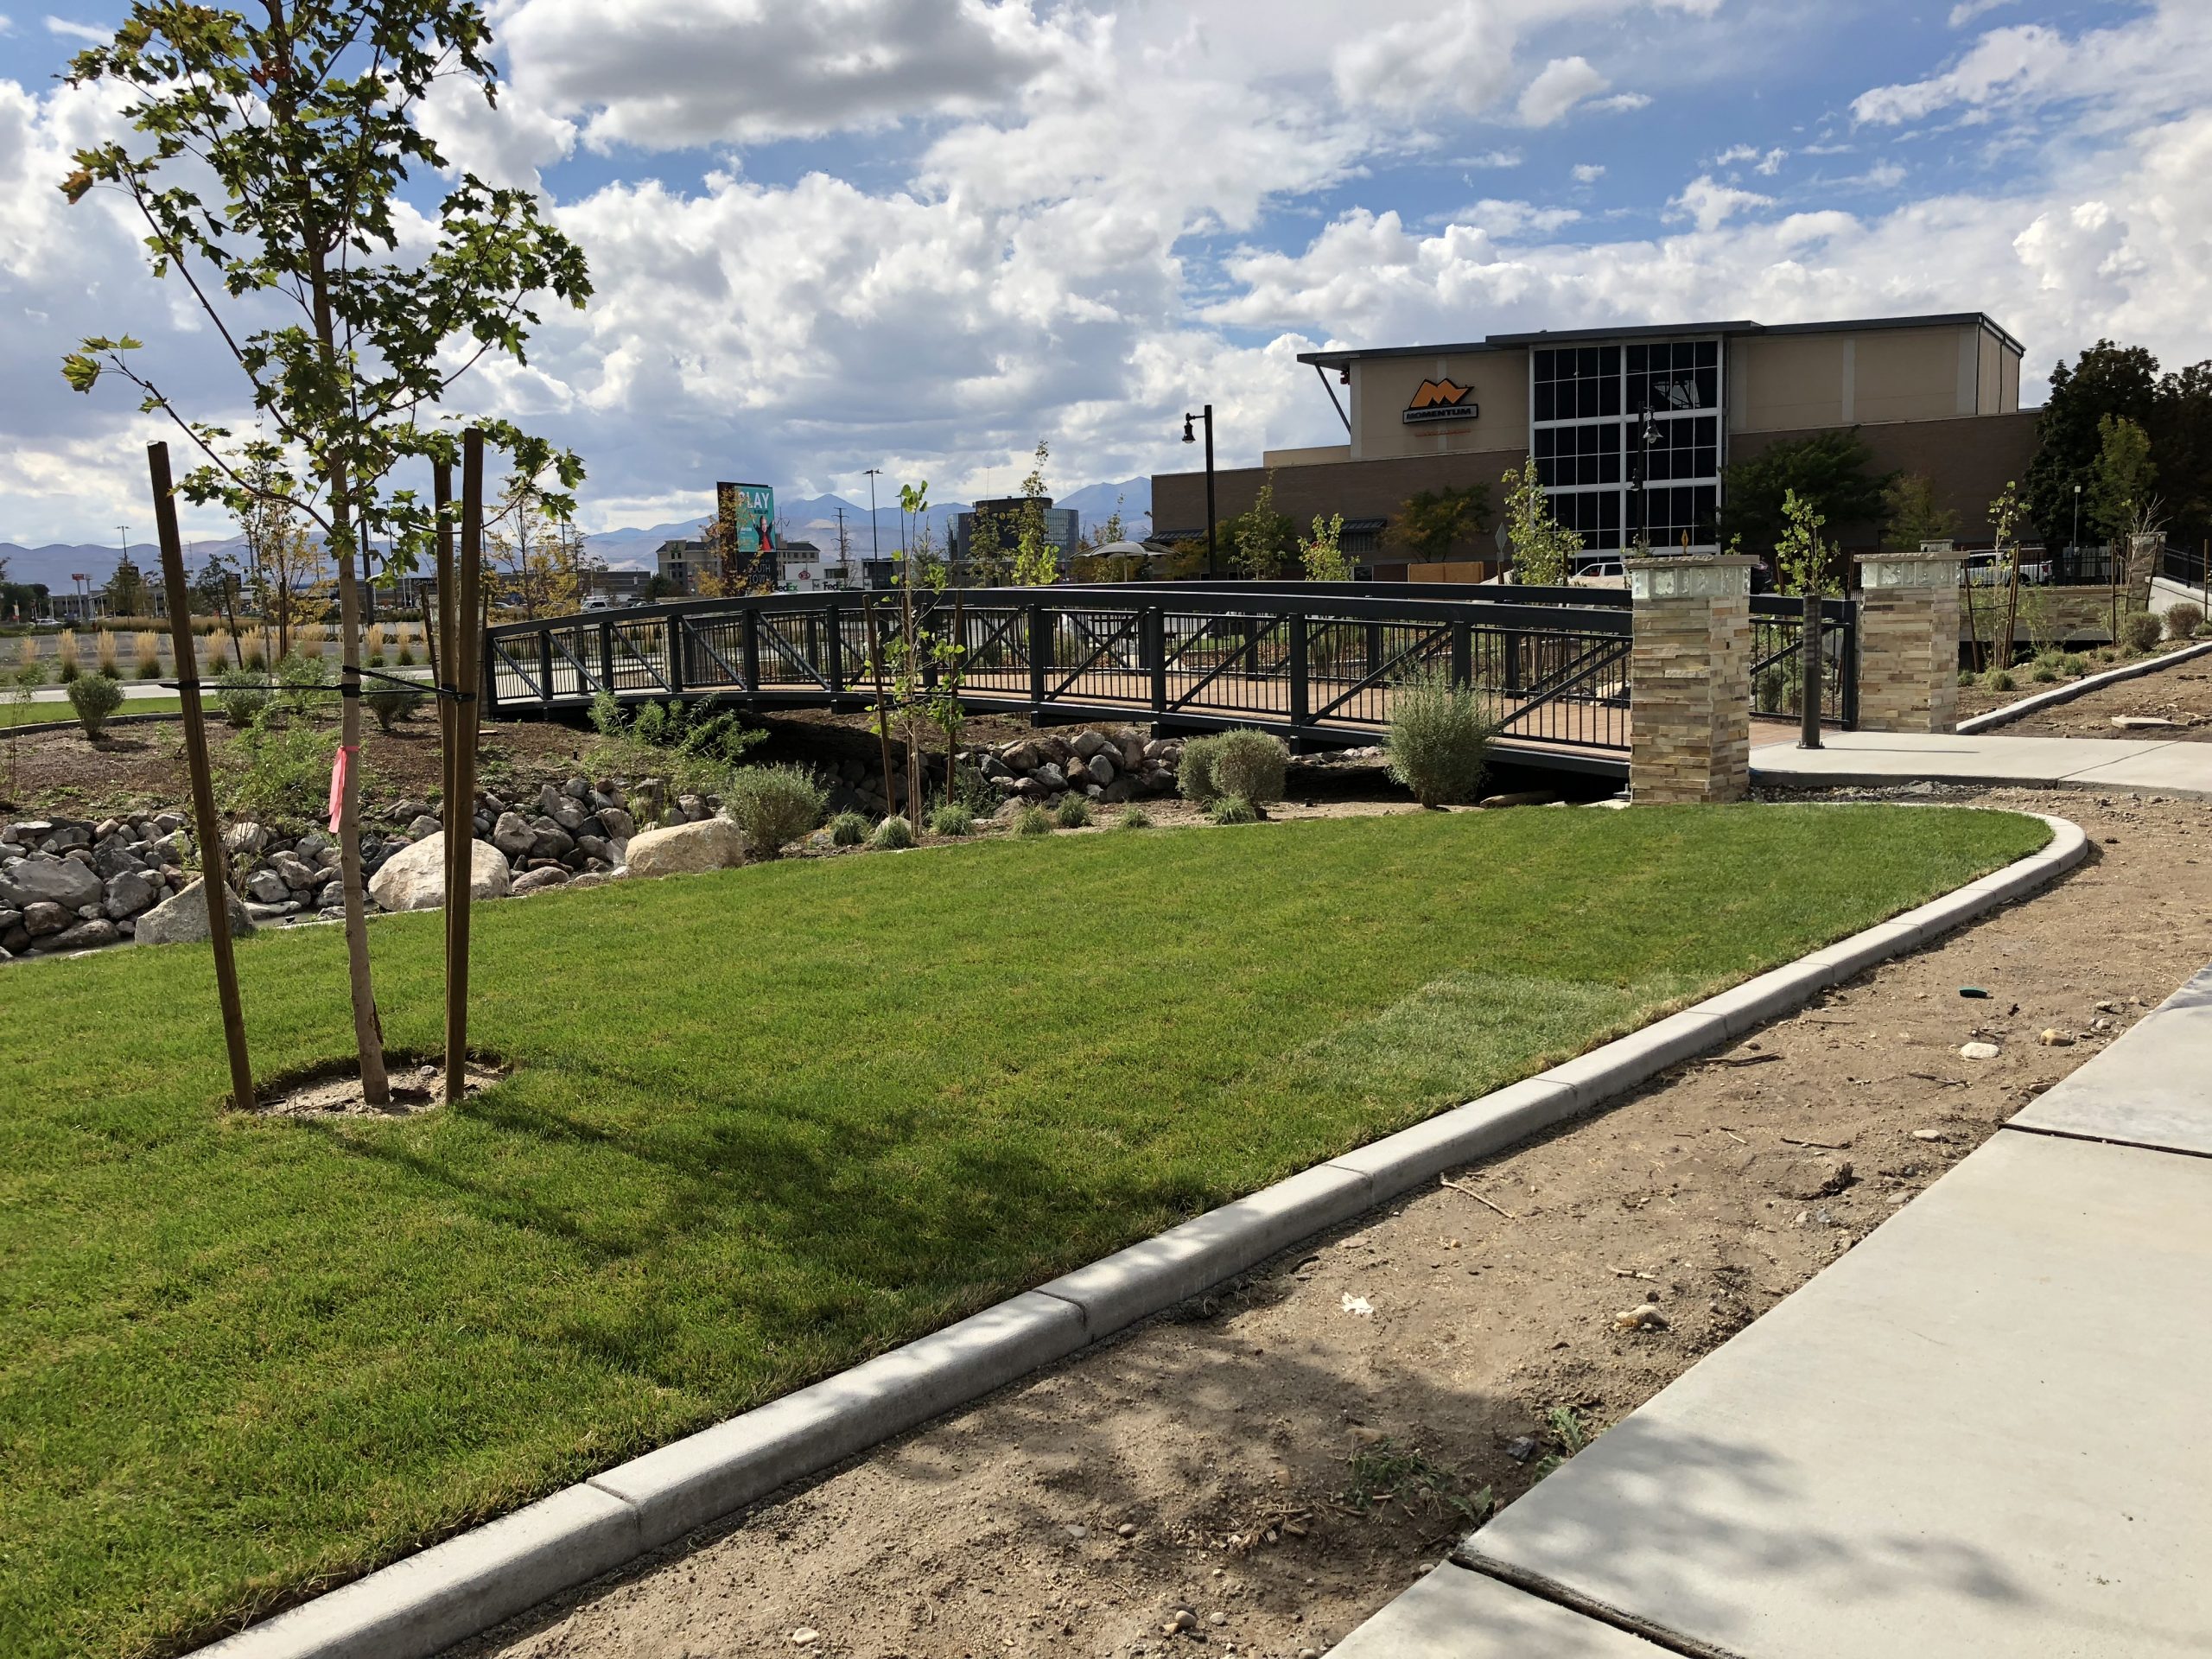 Pedestrian bridge over Dry Creek channel with surrounding grass, buildings, and sidewalks.